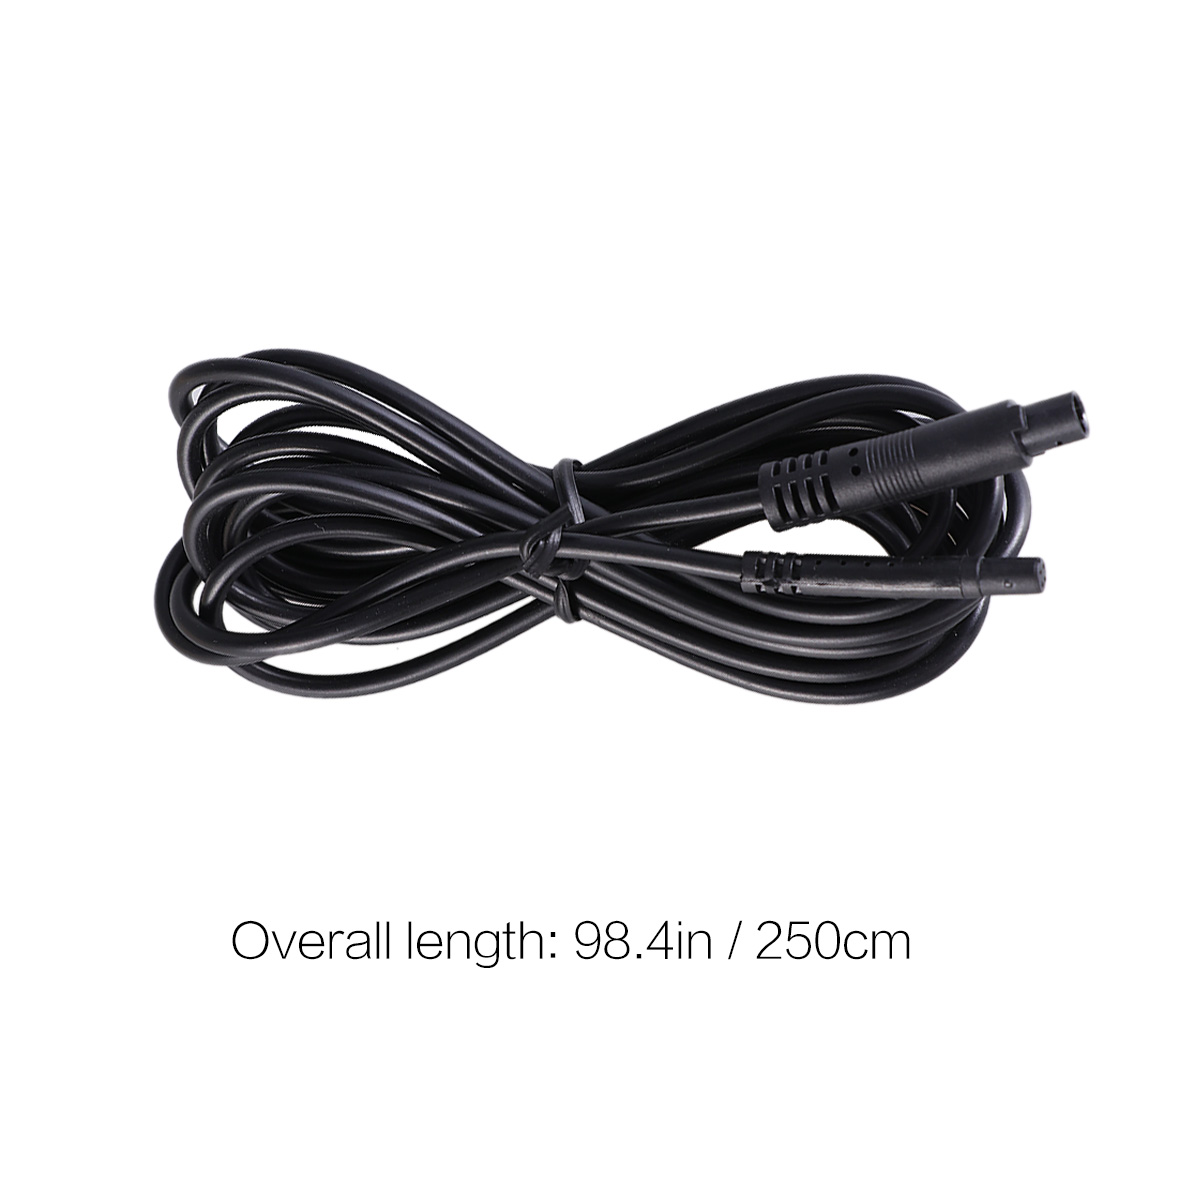 2.5m Extension Cable For Rear View Backup Dash Cam Reverse Car Recorder Camera Cord 4 Pins For 12V 24V Truck Trailer Camper Van